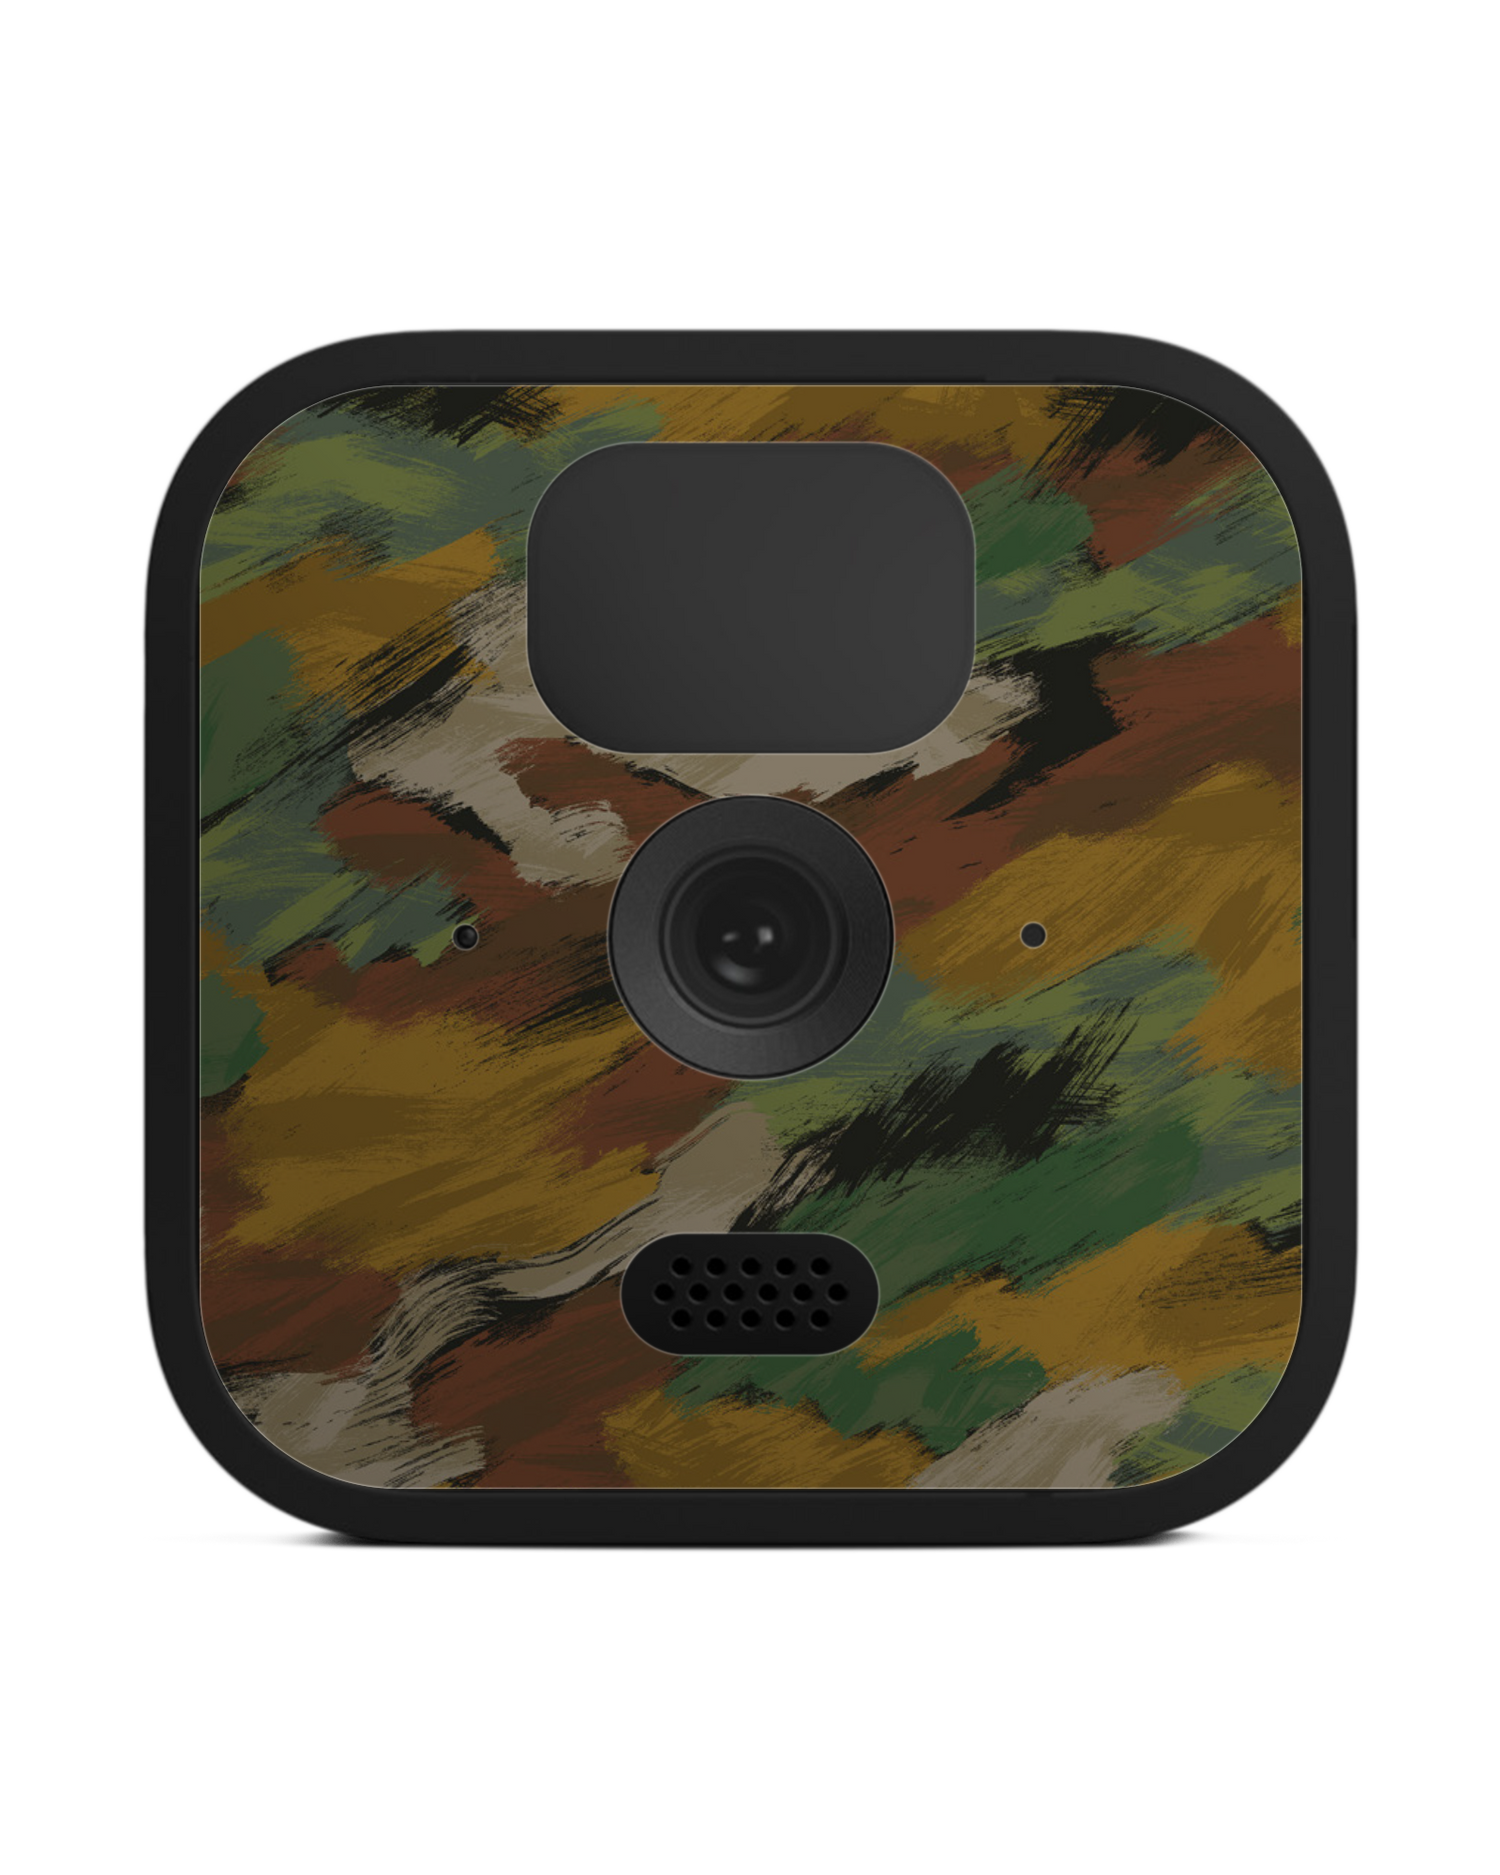 Texture Camo Camera Skin Blink Outdoor (2020): Front View